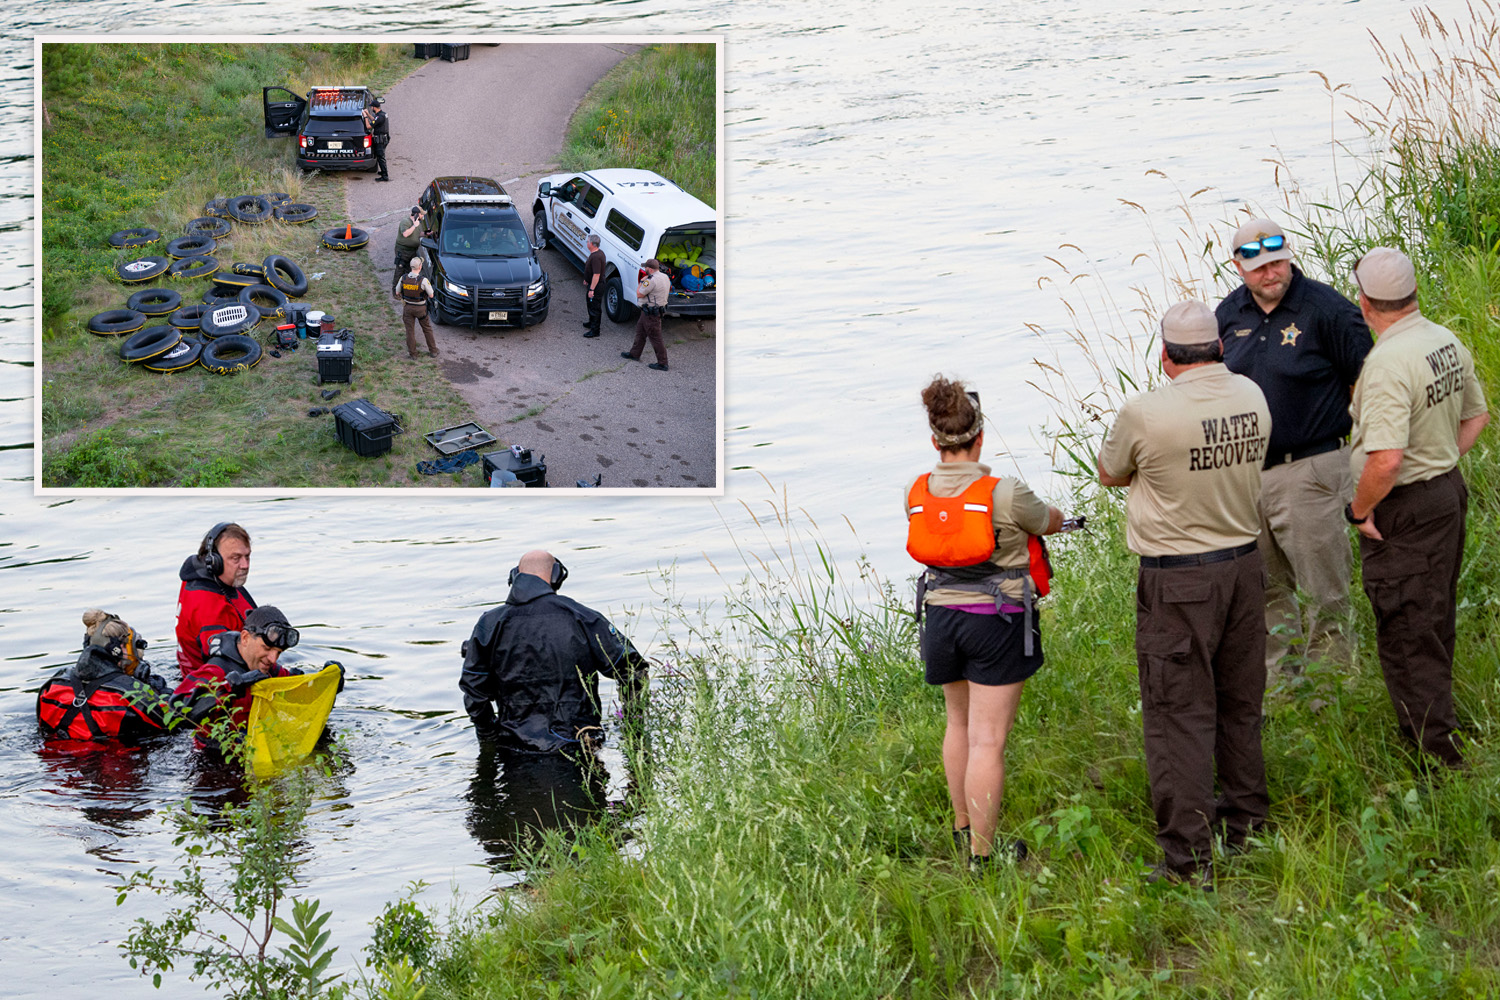 1 dead and 4 hurt after being stabbed while tubing as suspect escaped down river